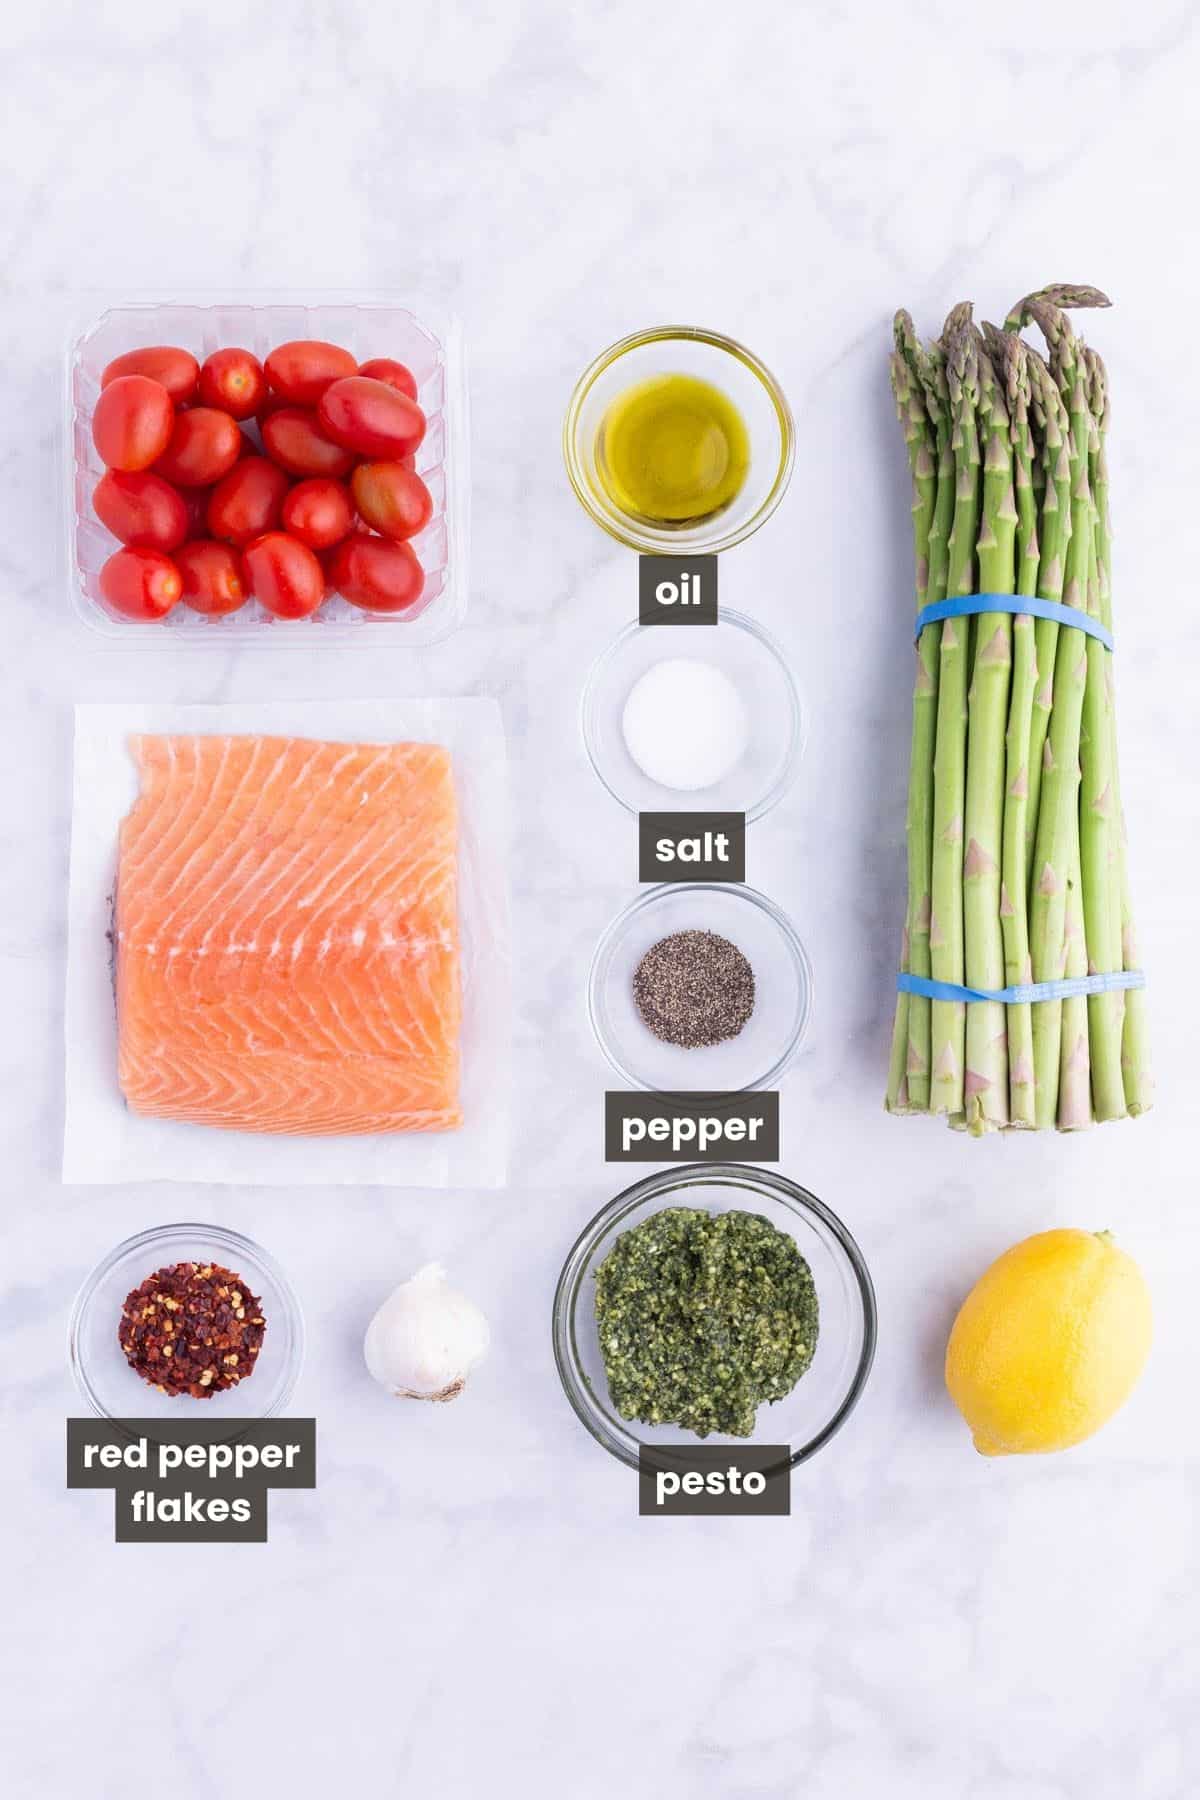 Salmon, asparagus, tomatoes, lemon, pesto, and seasonings are the main ingredients for this dish.